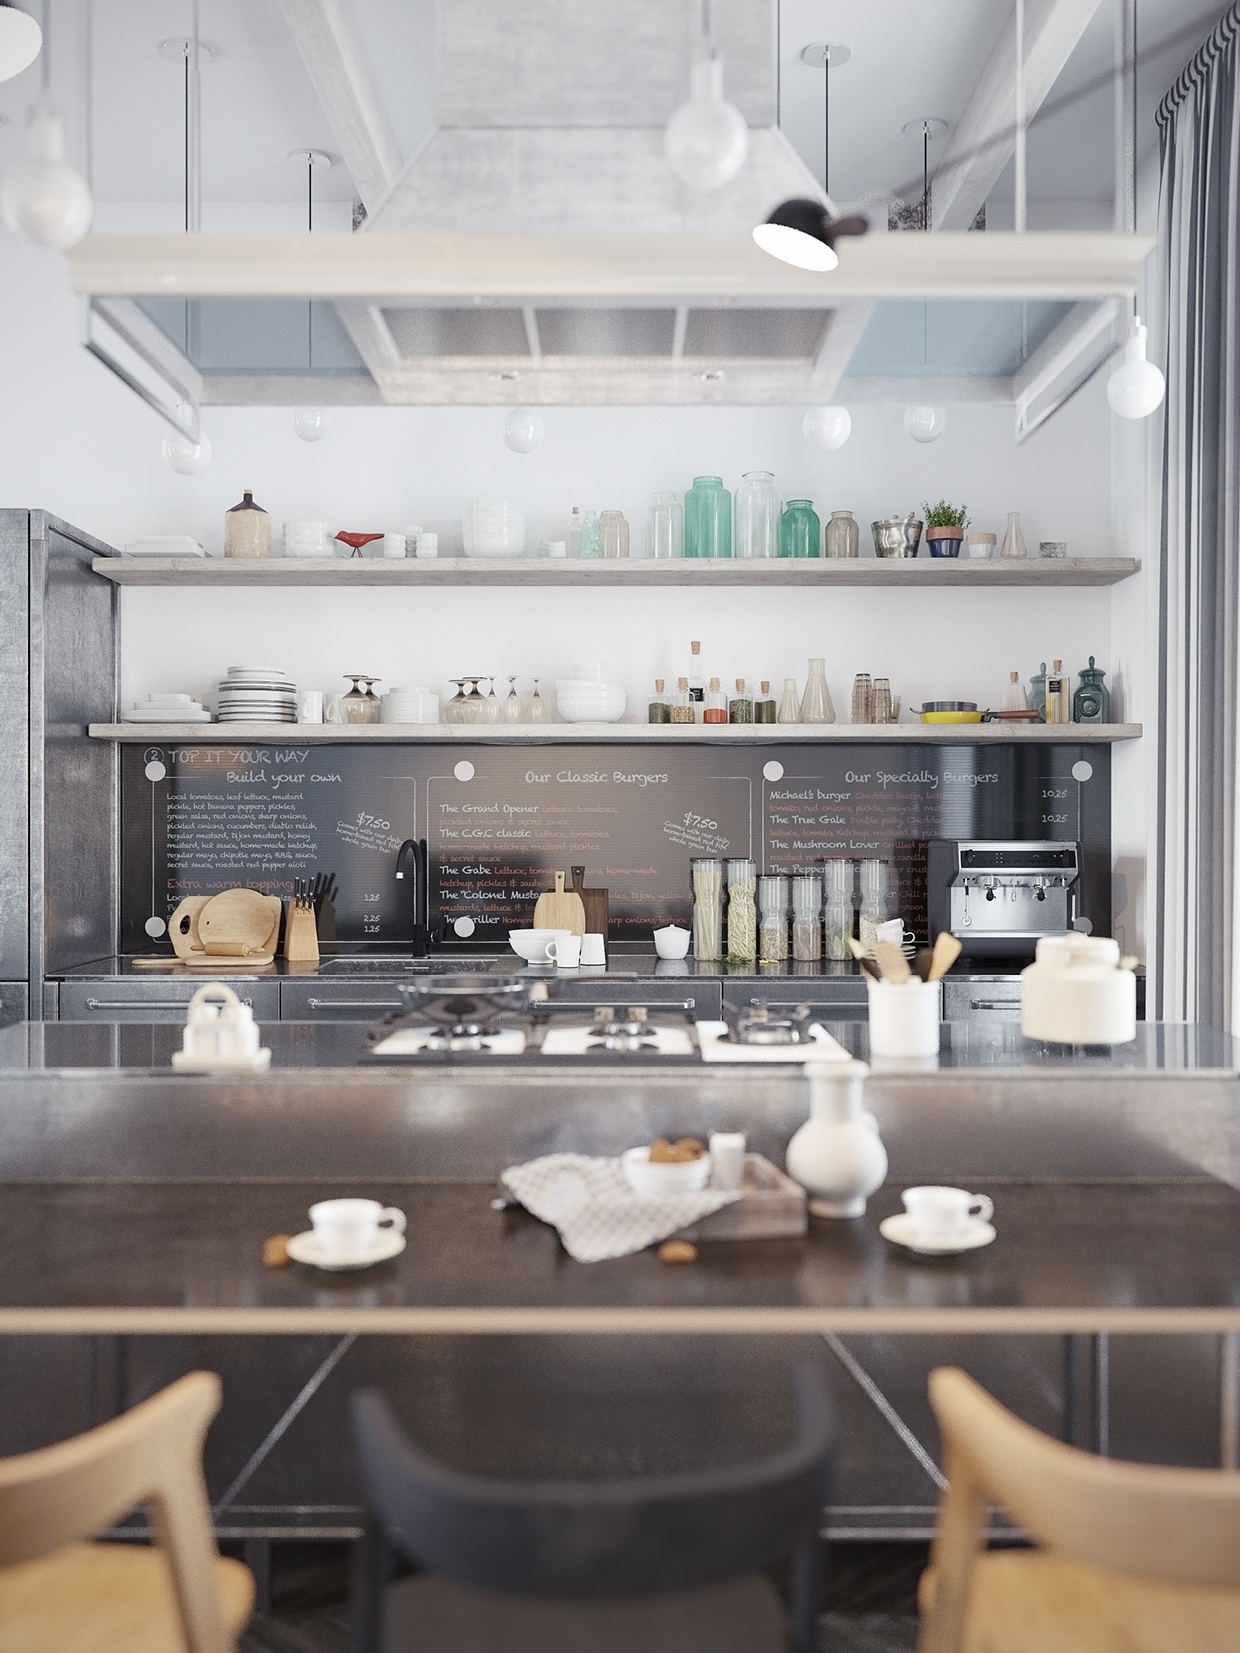 Design ideas for modern kitchens in Scandinavia "width =" 1240 "height =" 1653 "srcset =" https://mileray.com/wp-content/uploads/2020/05/1588512749_687_6-Beautiful-Scandinavian-Kitchen-Design-Ideas-with-A-Simple-Dining.jpg 1240w, https: / / mileray.com/wp-content/uploads/2016/05/Denis-Krasikov-1-225x300.jpg 225w, https://mileray.com/wp-content/uploads/2016/05/Denis-Krasikov-1- 768x1024 .jpg 768w, https://mileray.com/wp-content/uploads/2016/05/Denis-Krasikov-1-696x928.jpg 696w, https://mileray.com/wp-content/uploads/2016/ 05 /Denis-Krasikov-1-1068x1424.jpg 1068w, https://mileray.com/wp-content/uploads/2016/05/Denis-Krasikov-1-315x420.jpg 315w "Sizes =" (maximum width: 1240px ) 100vw, 1240px